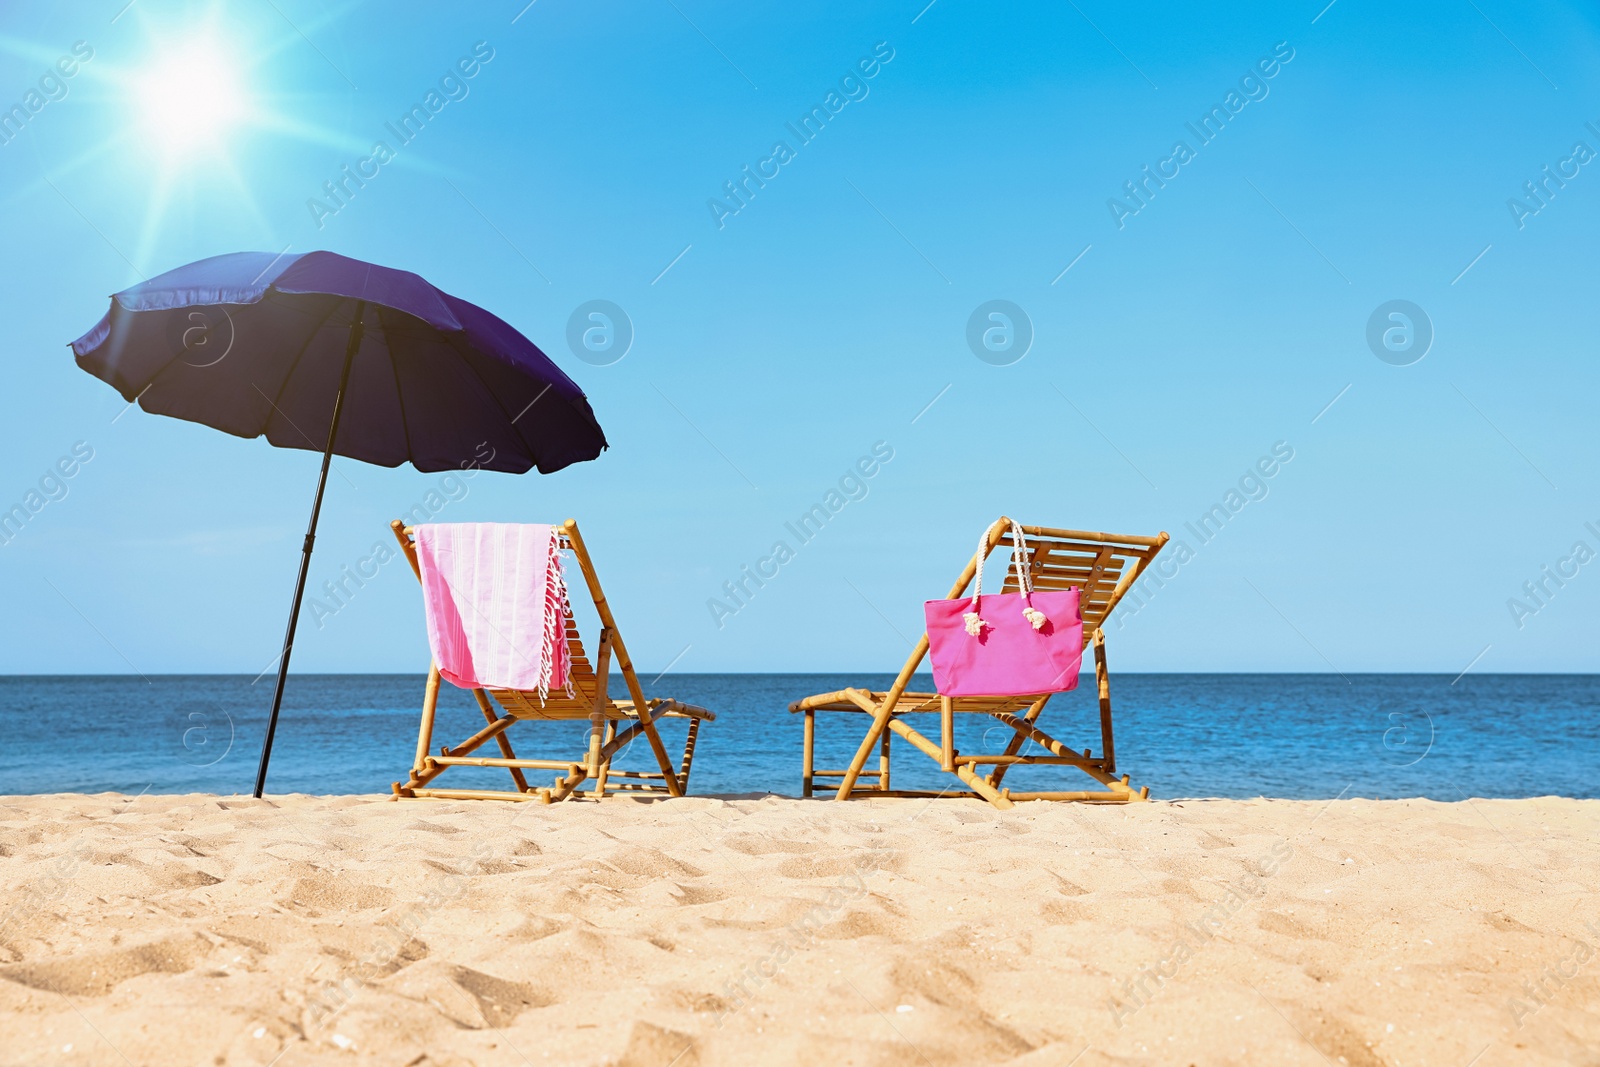 Photo of Empty wooden sunbeds and beach accessories on sandy shore